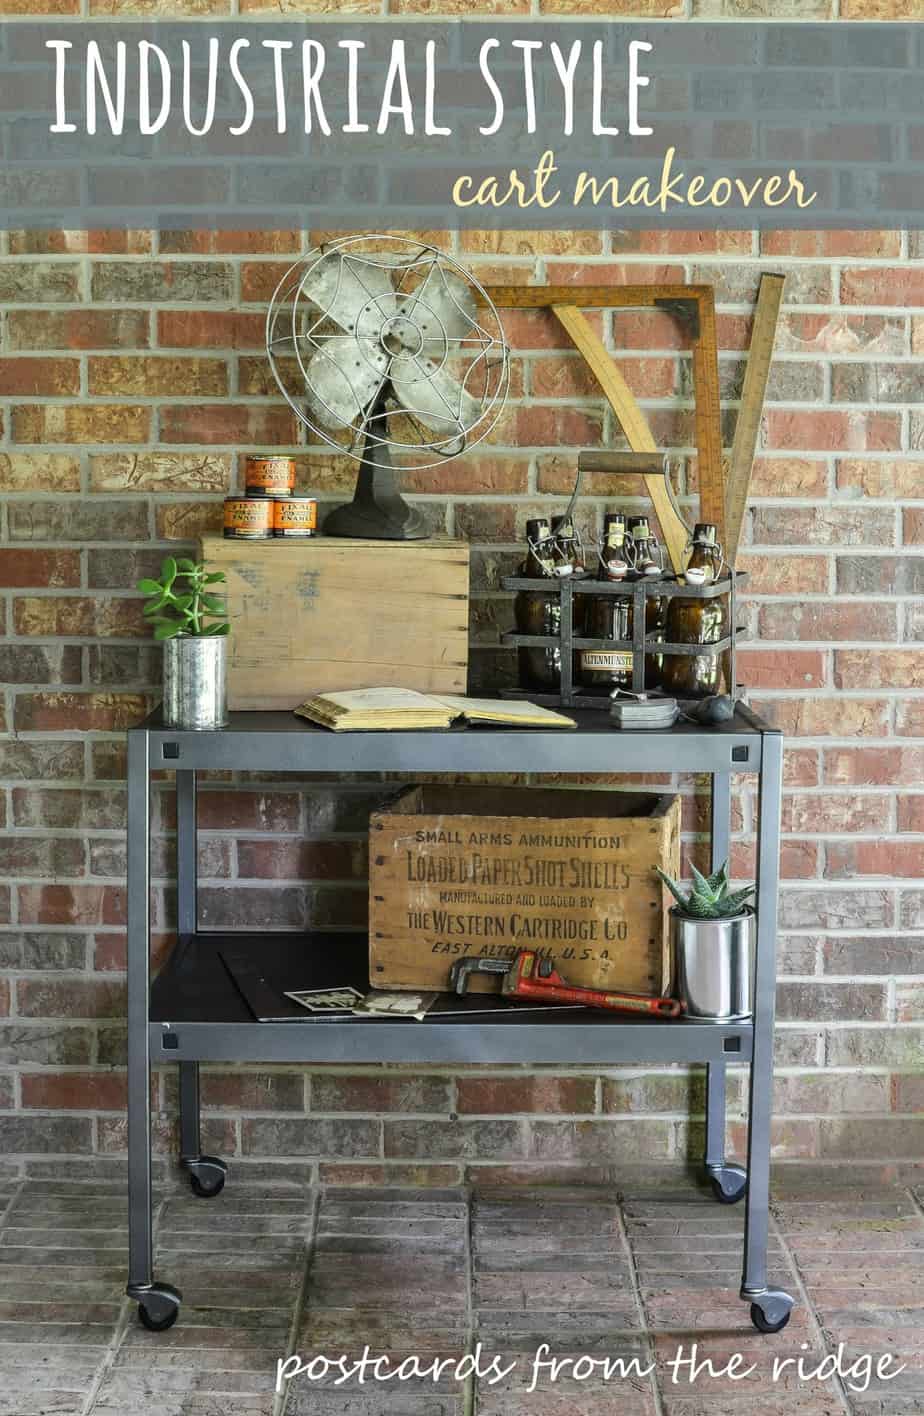 How to easily transform a boring commercial cart into a stylish industrial piece. Could be used as a bar cart or coffee station. Love the styling! Postcards from the Ridge